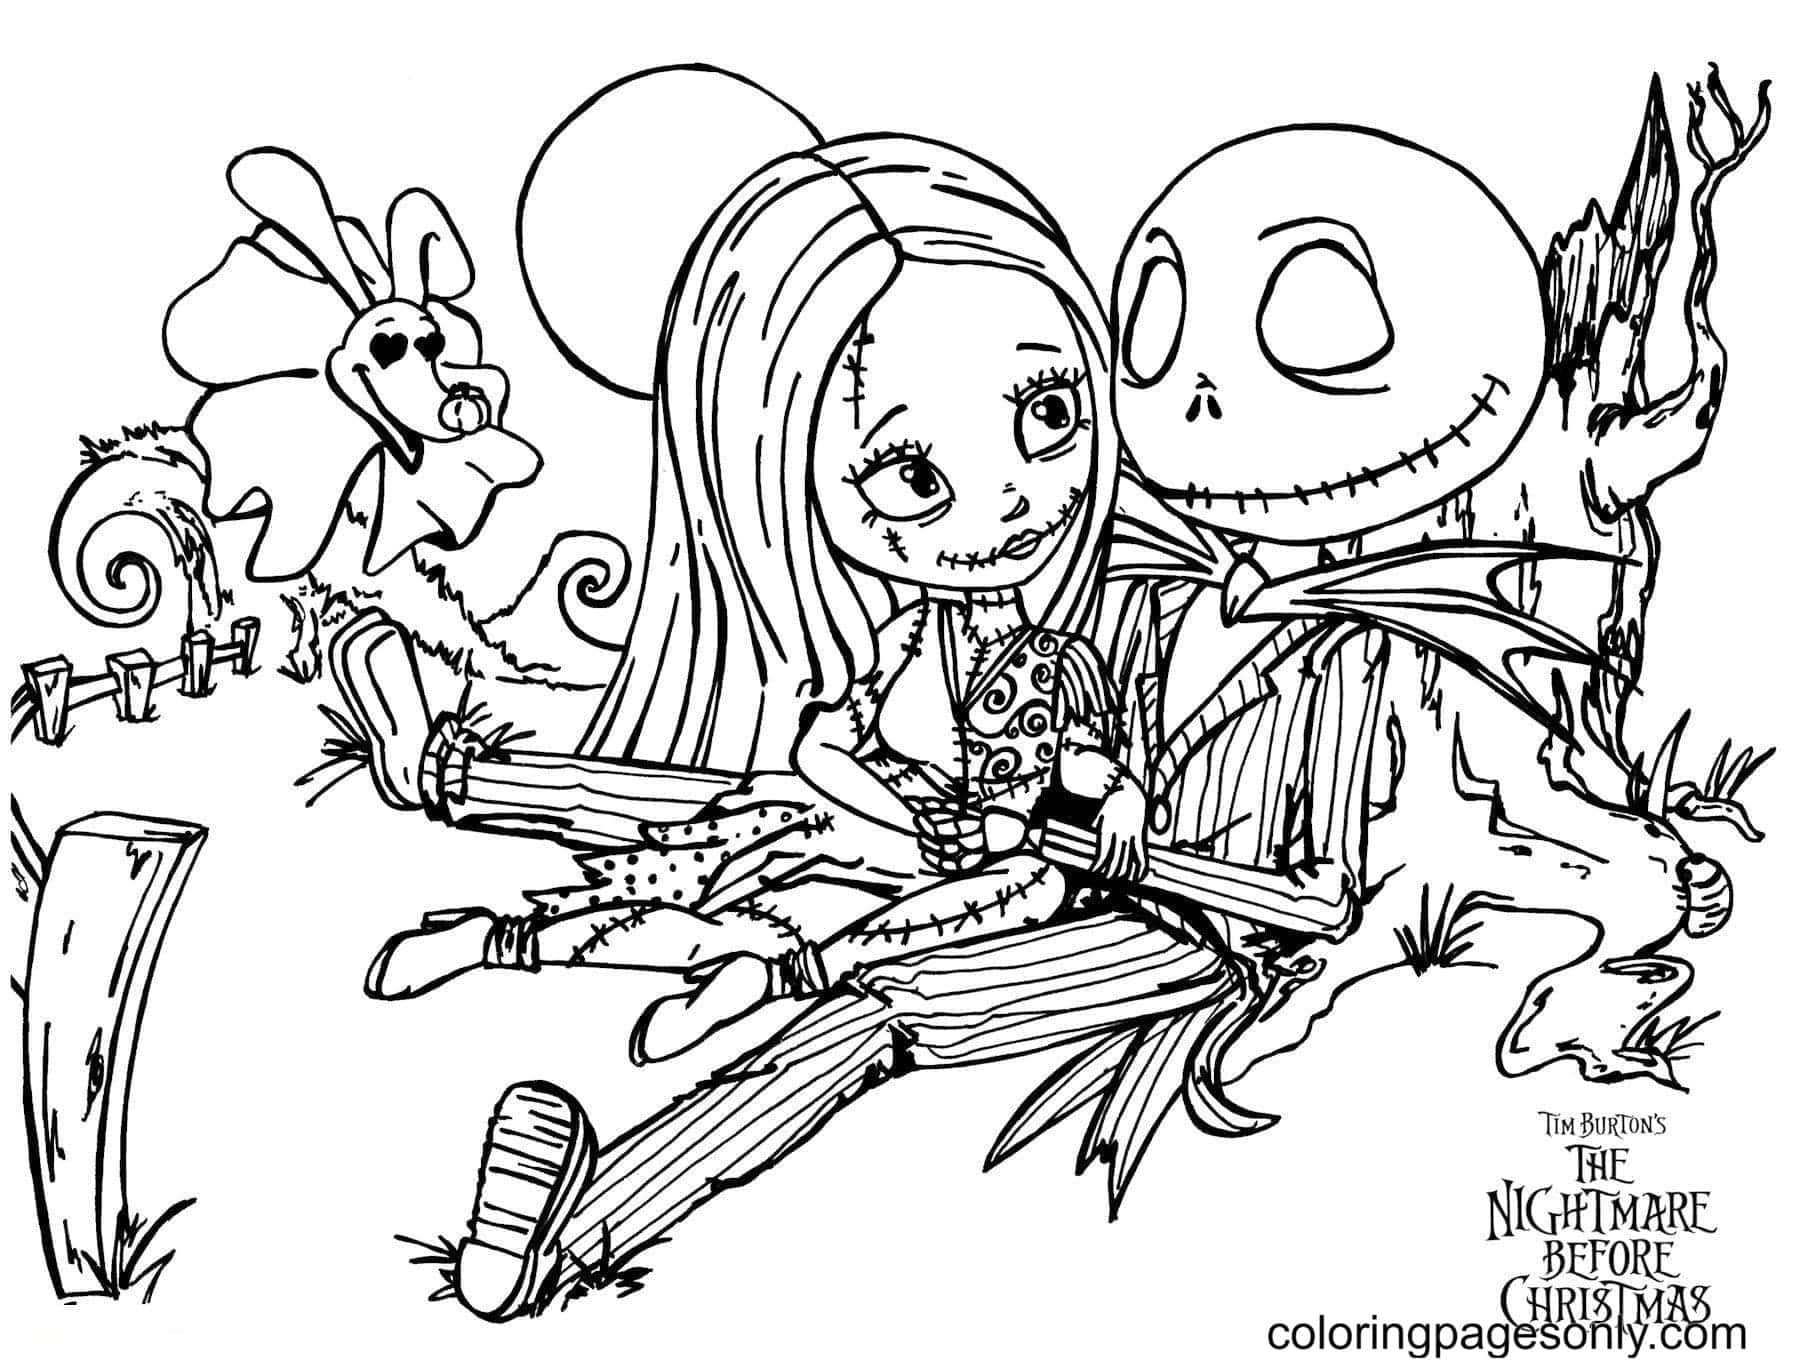 Cartoon characters Coloring Pages   Nightmare Before Christmas ...